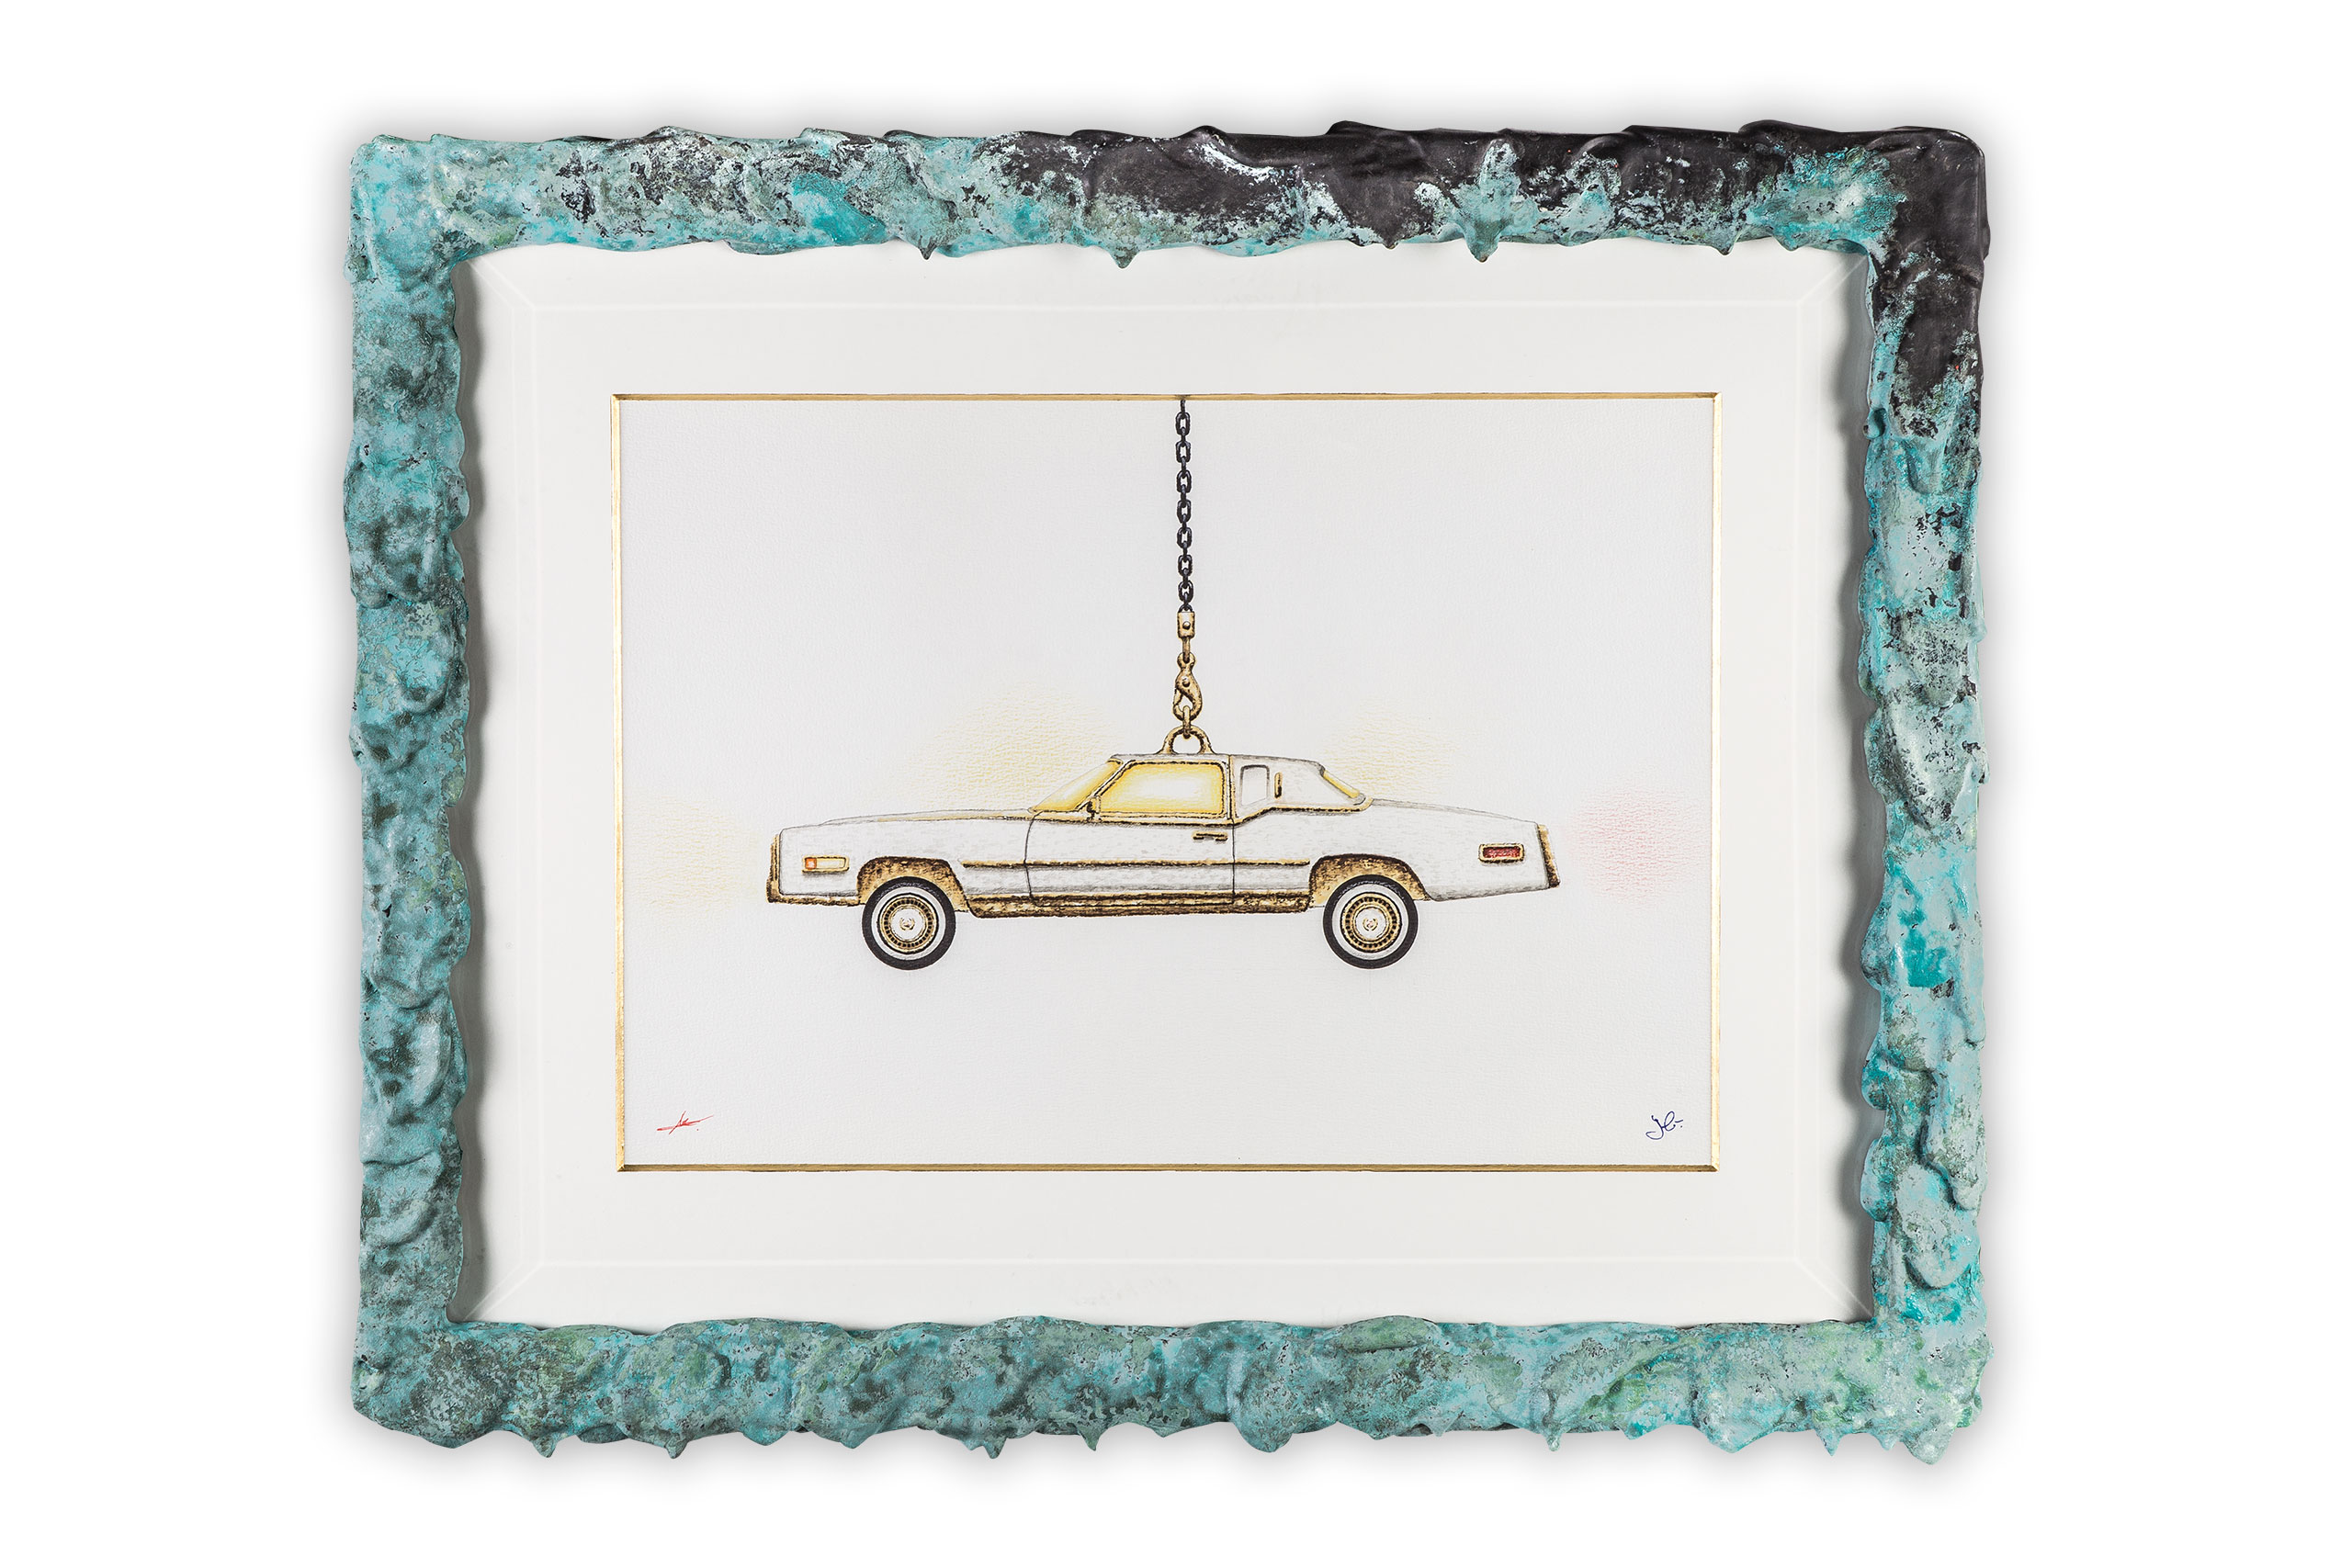 Studio Job, Eldorado, 2019. Drawing in crayon, felt-tip, ink, and 24k gold on paper. Patinated frame with faceted glass.
Courtesy of R &amp; Company and Studio Job.